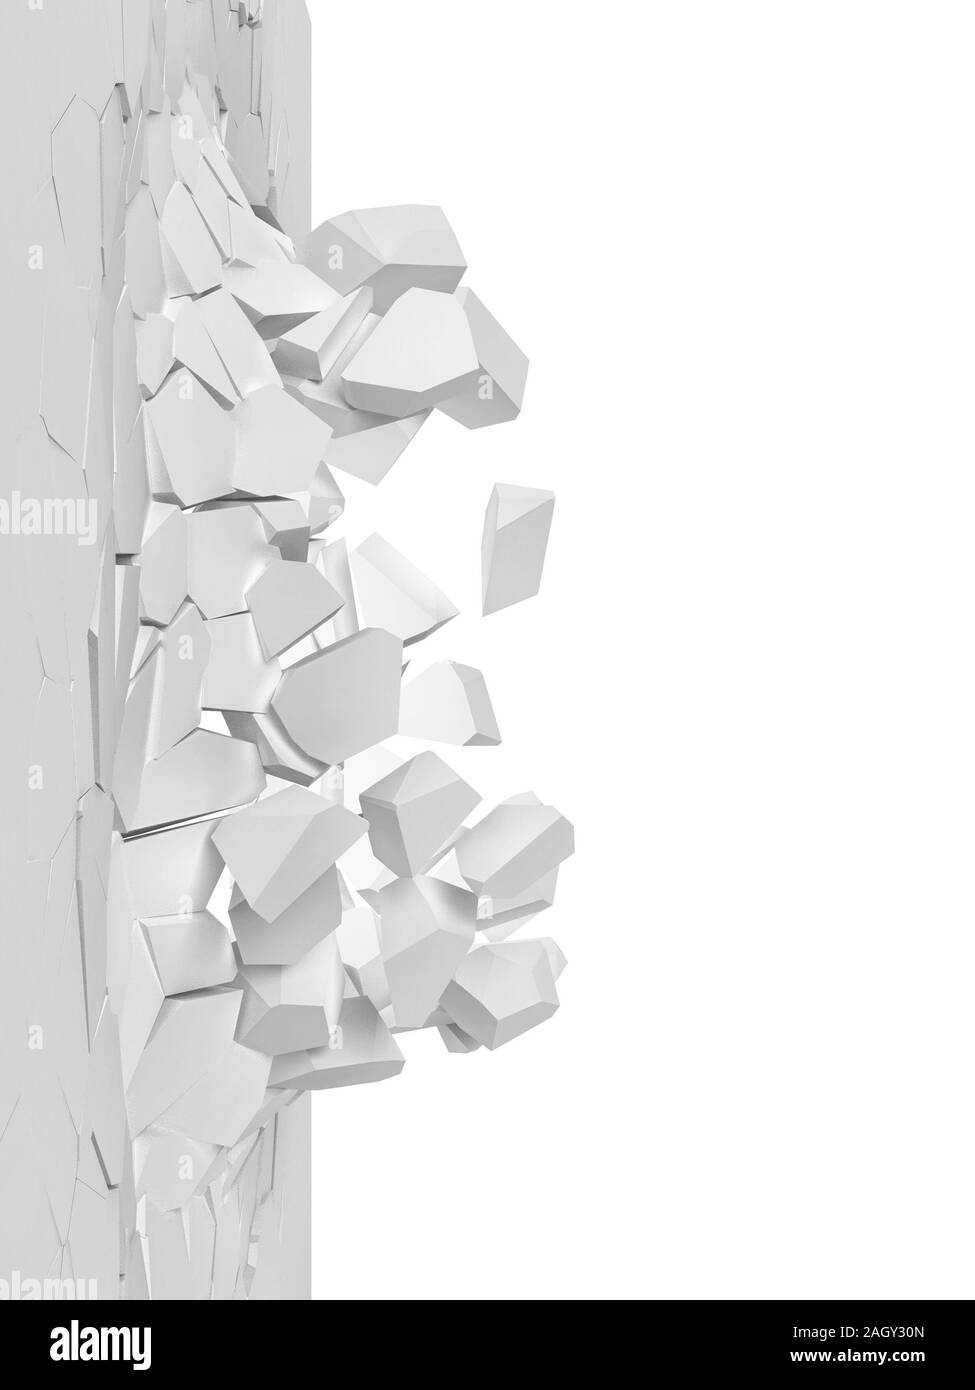 Broken wall. 3d illustration isolated on white background Stock Photo